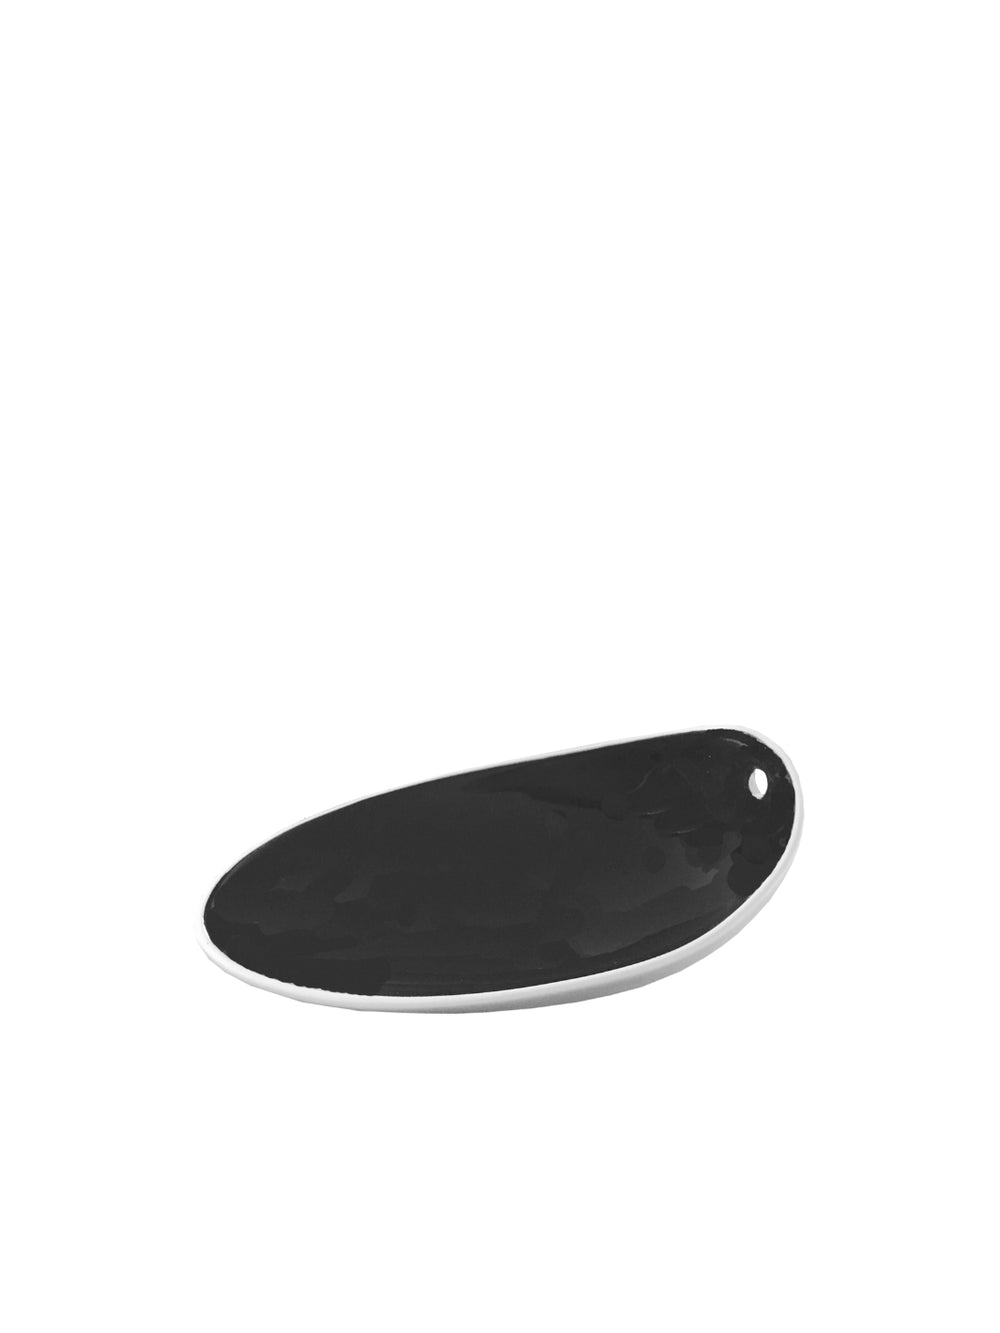 Photo of COOKPLAY Jomon Small Plate (14x11cm/5.5x4.3in) ( Glazed Black ) [ Cookplay ] [ Bowls ]